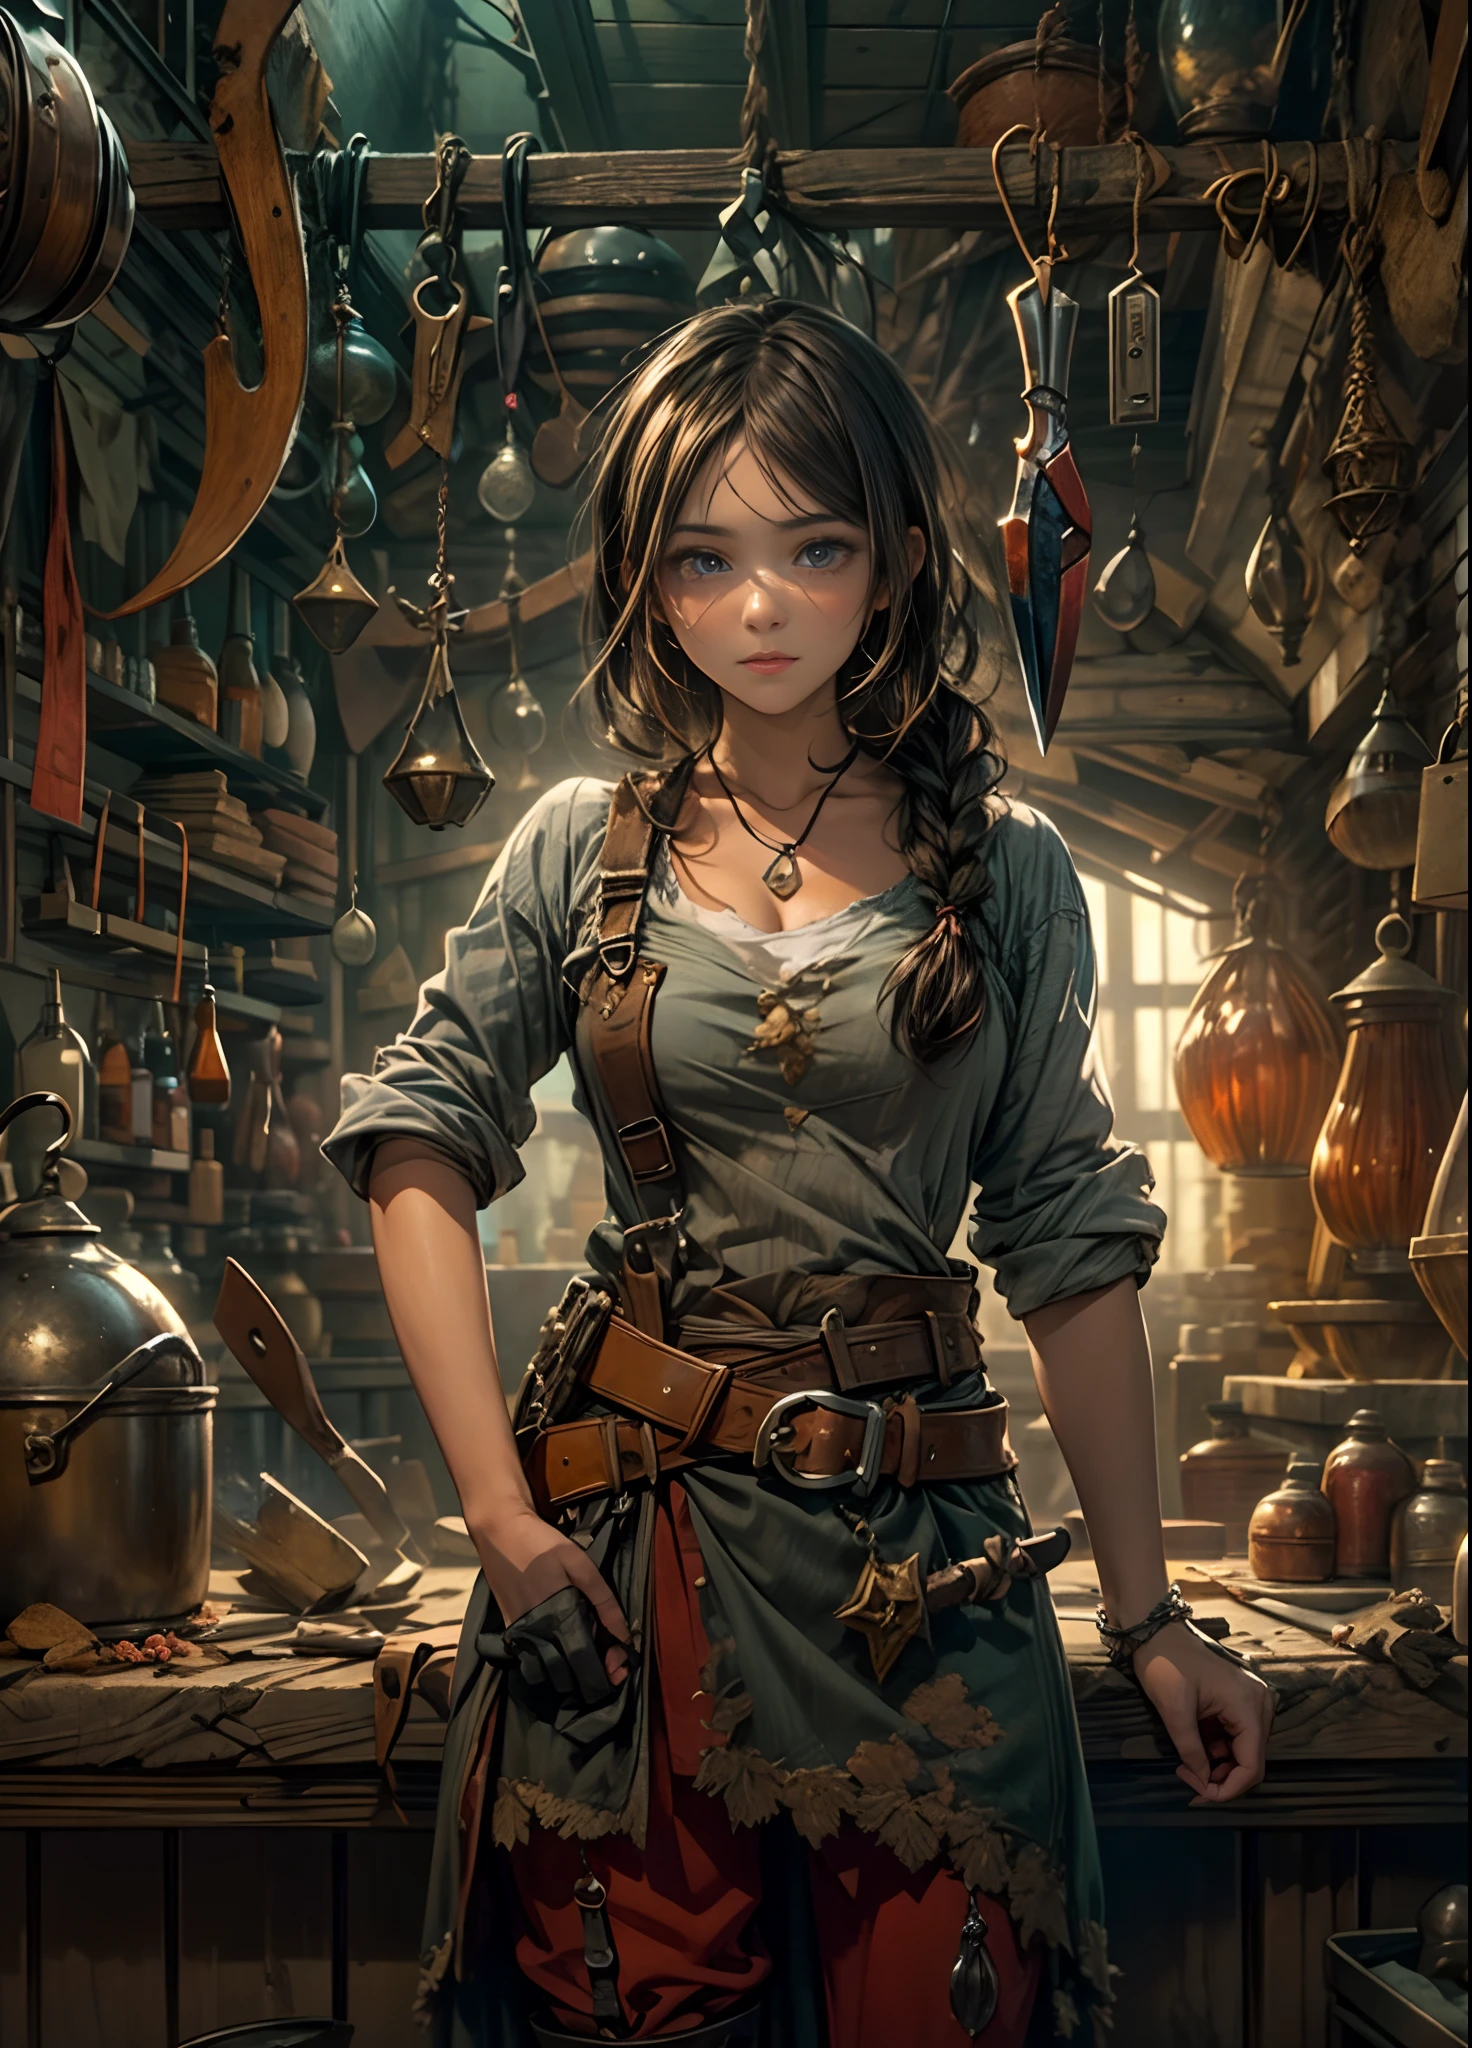 masterpiece, concept art, medium shot, panoramic, blacksmith weapon store interior, weapon variety hanged in wall, mythical, fantasy theme, 1girl as a blacksmith, storekeeper, behind counter, blacksmith outfit, sexy, cute, cozy, atmospheric, (epic composition, epic proportion, highly detailed), HD, vibrant color,